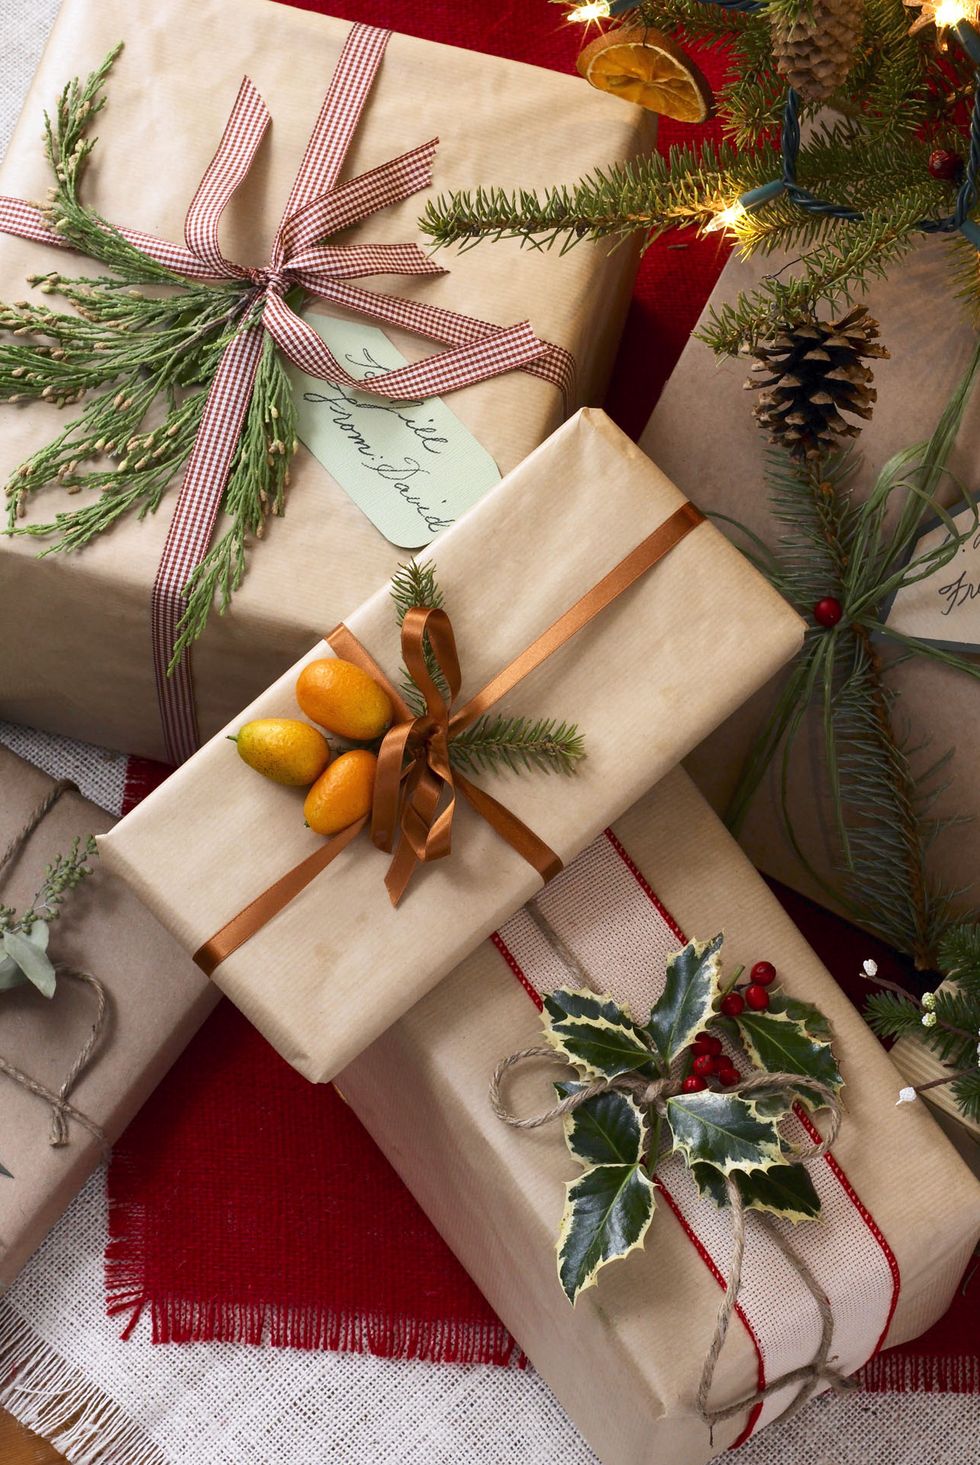 How to Make Natural Gift Toppers